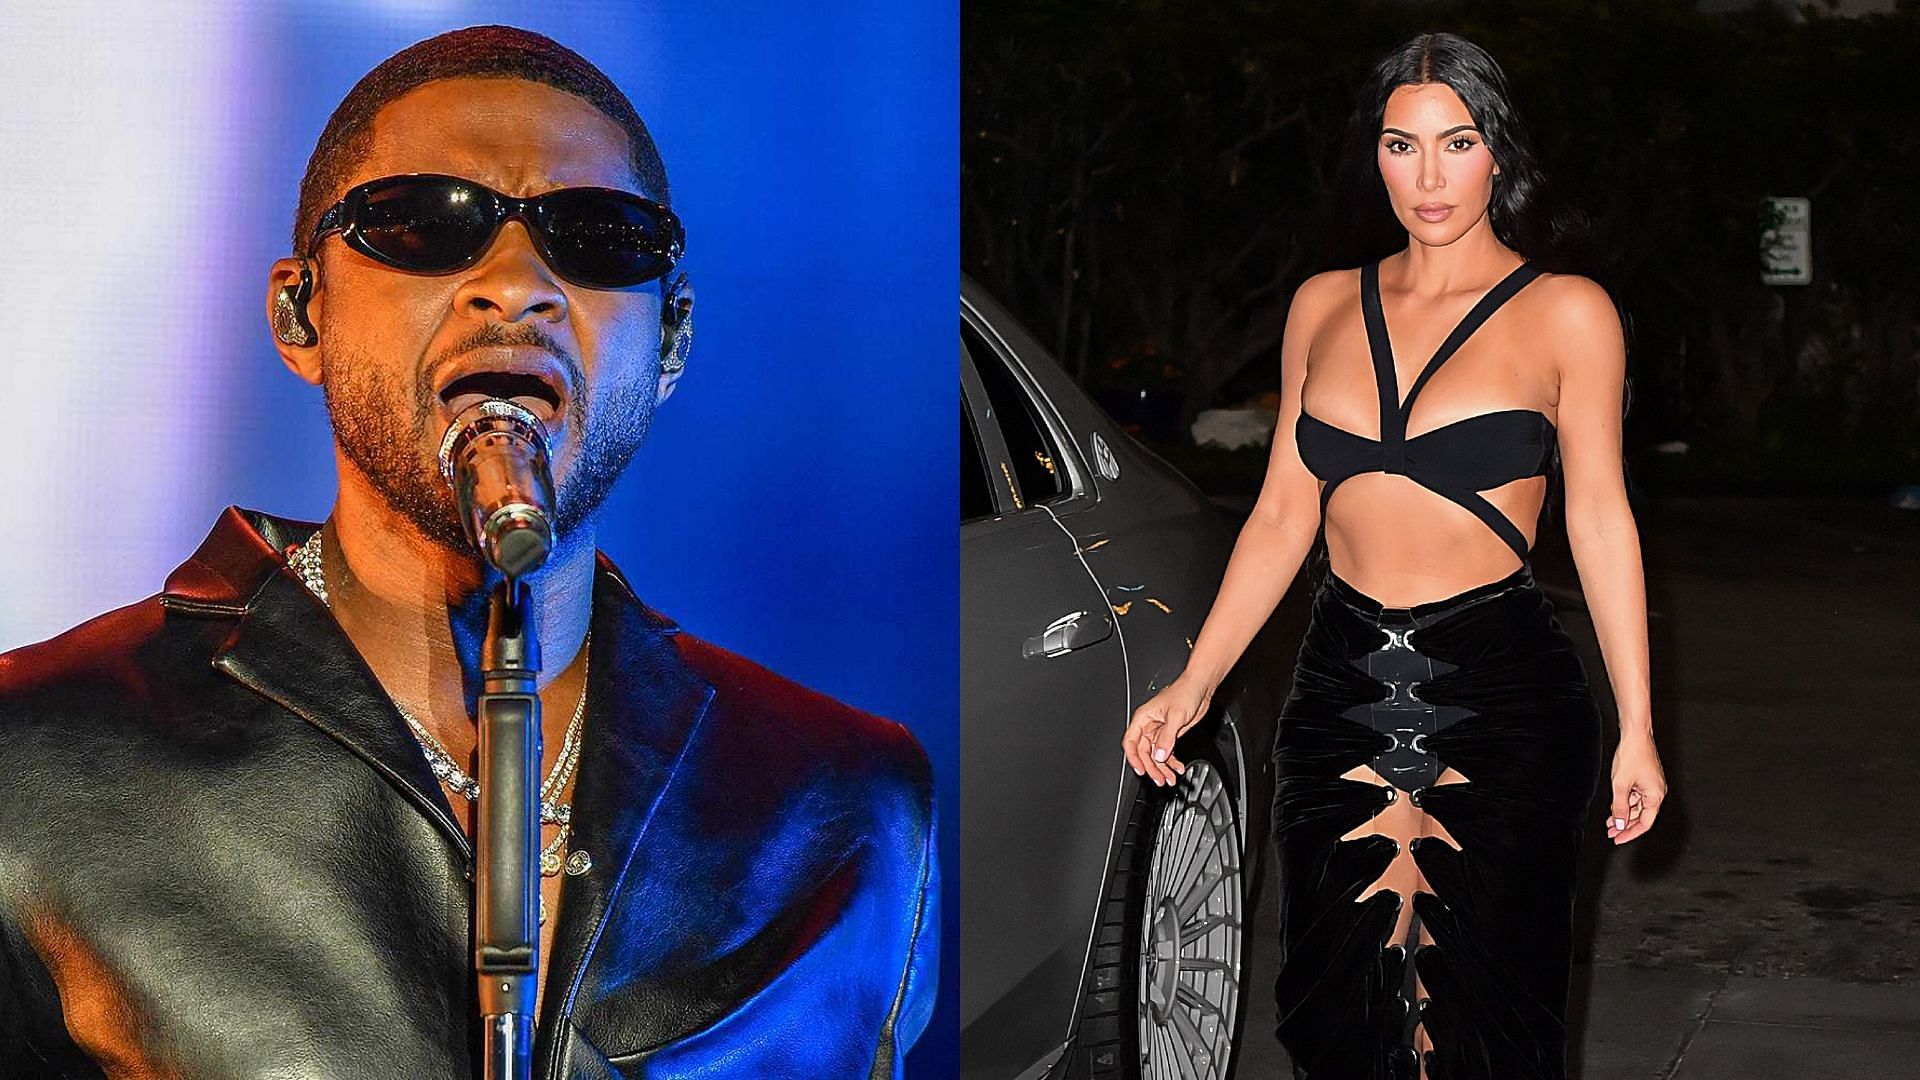 Fans do not like the announcement for Super Bowl LVIII halftime show, which featured Kim Kardashian.